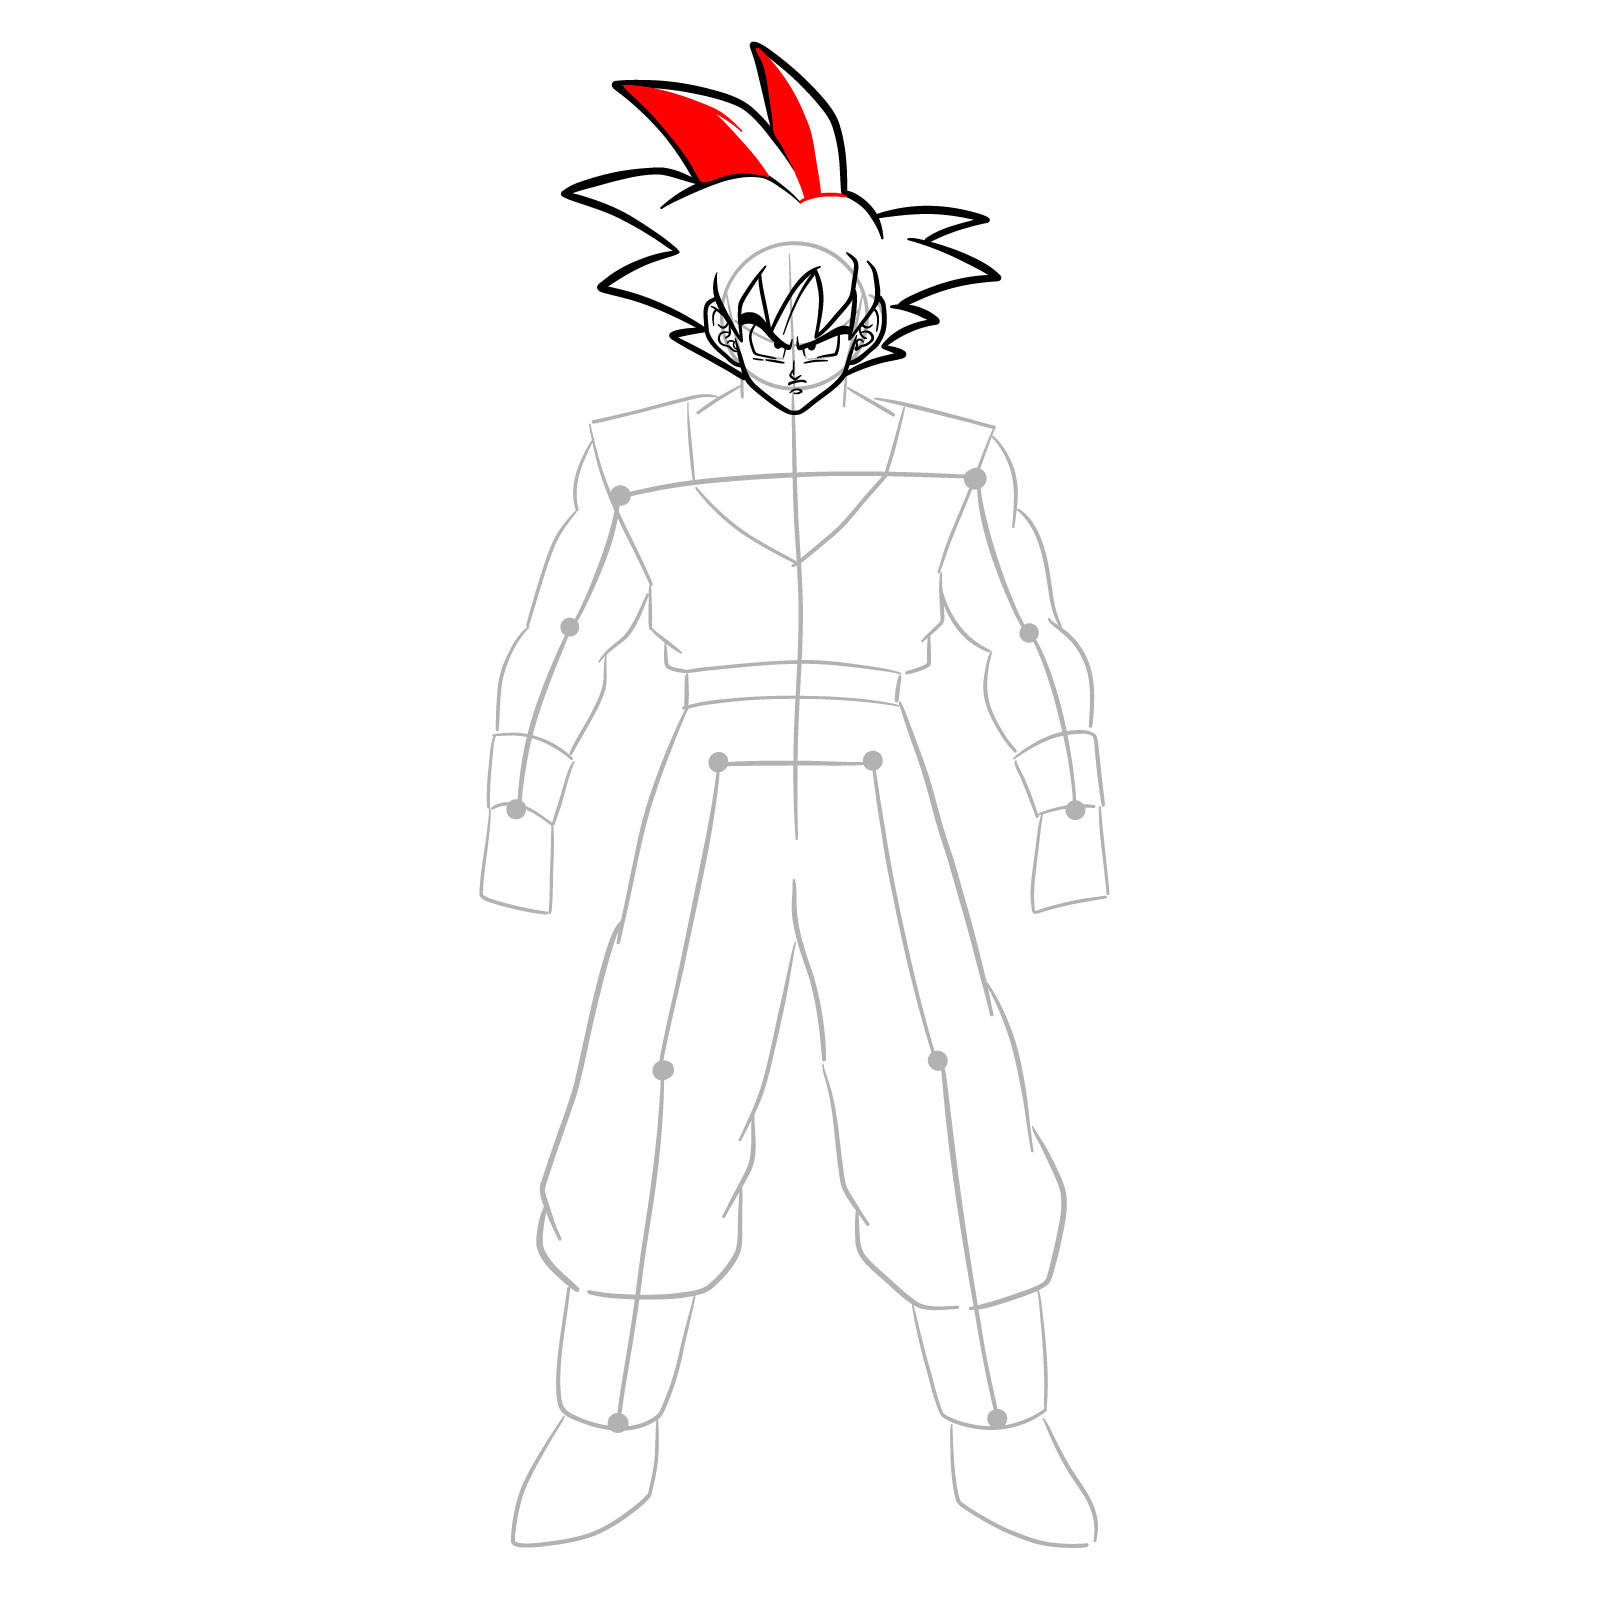 How to Draw Goku Super Saiyan on Namek - Easy Step-by-Step Tutorial for  Dragon Ball Fans 